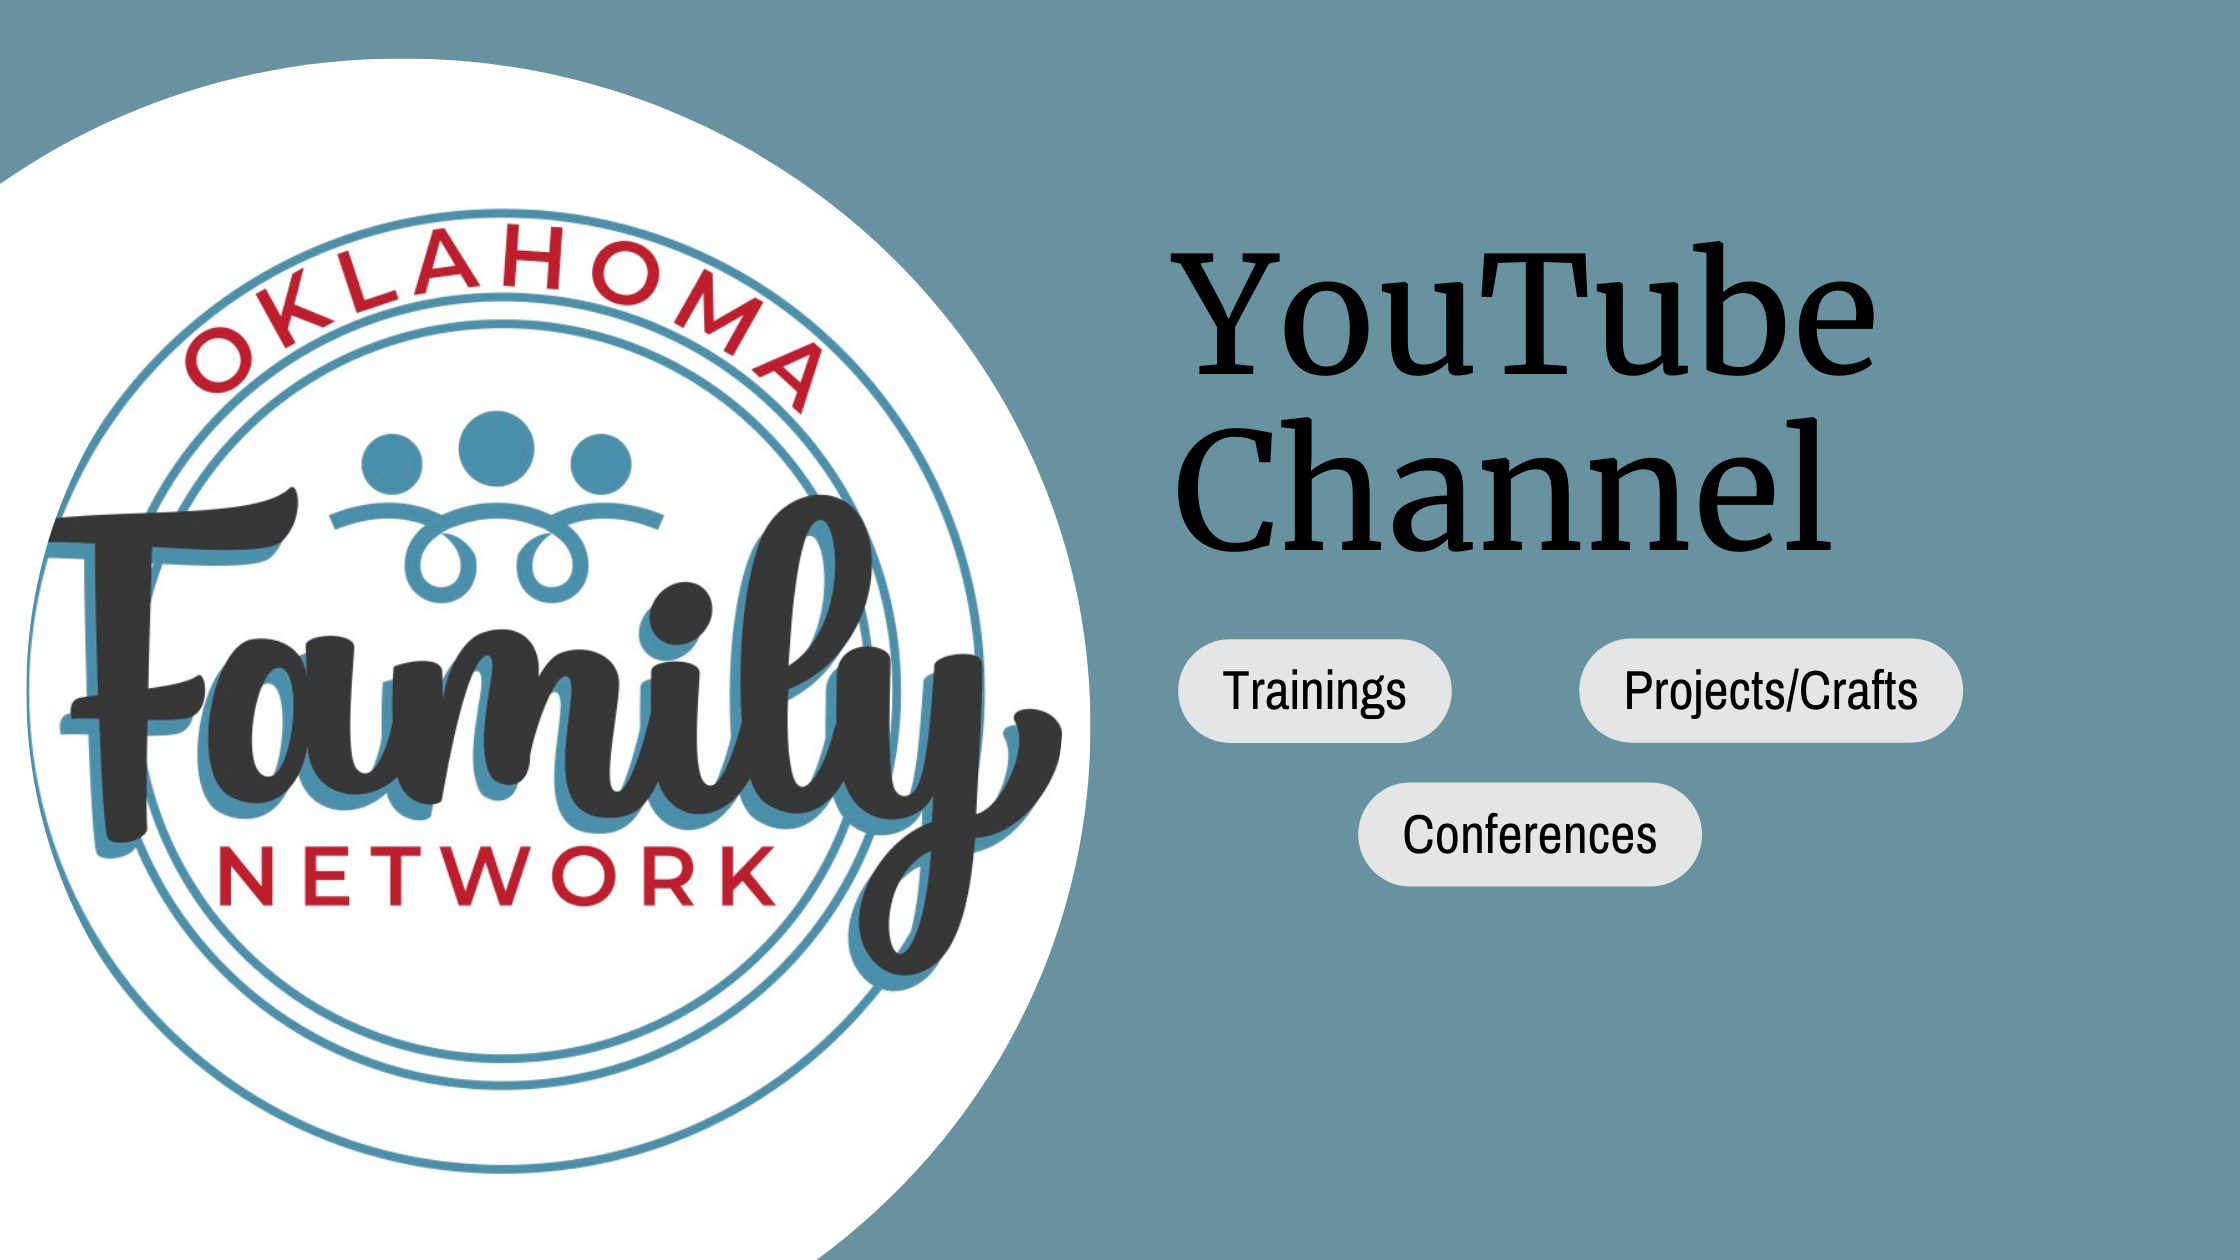 Oklahoma Family Network YouTube Channel features trainings, projects/crafts/conderences